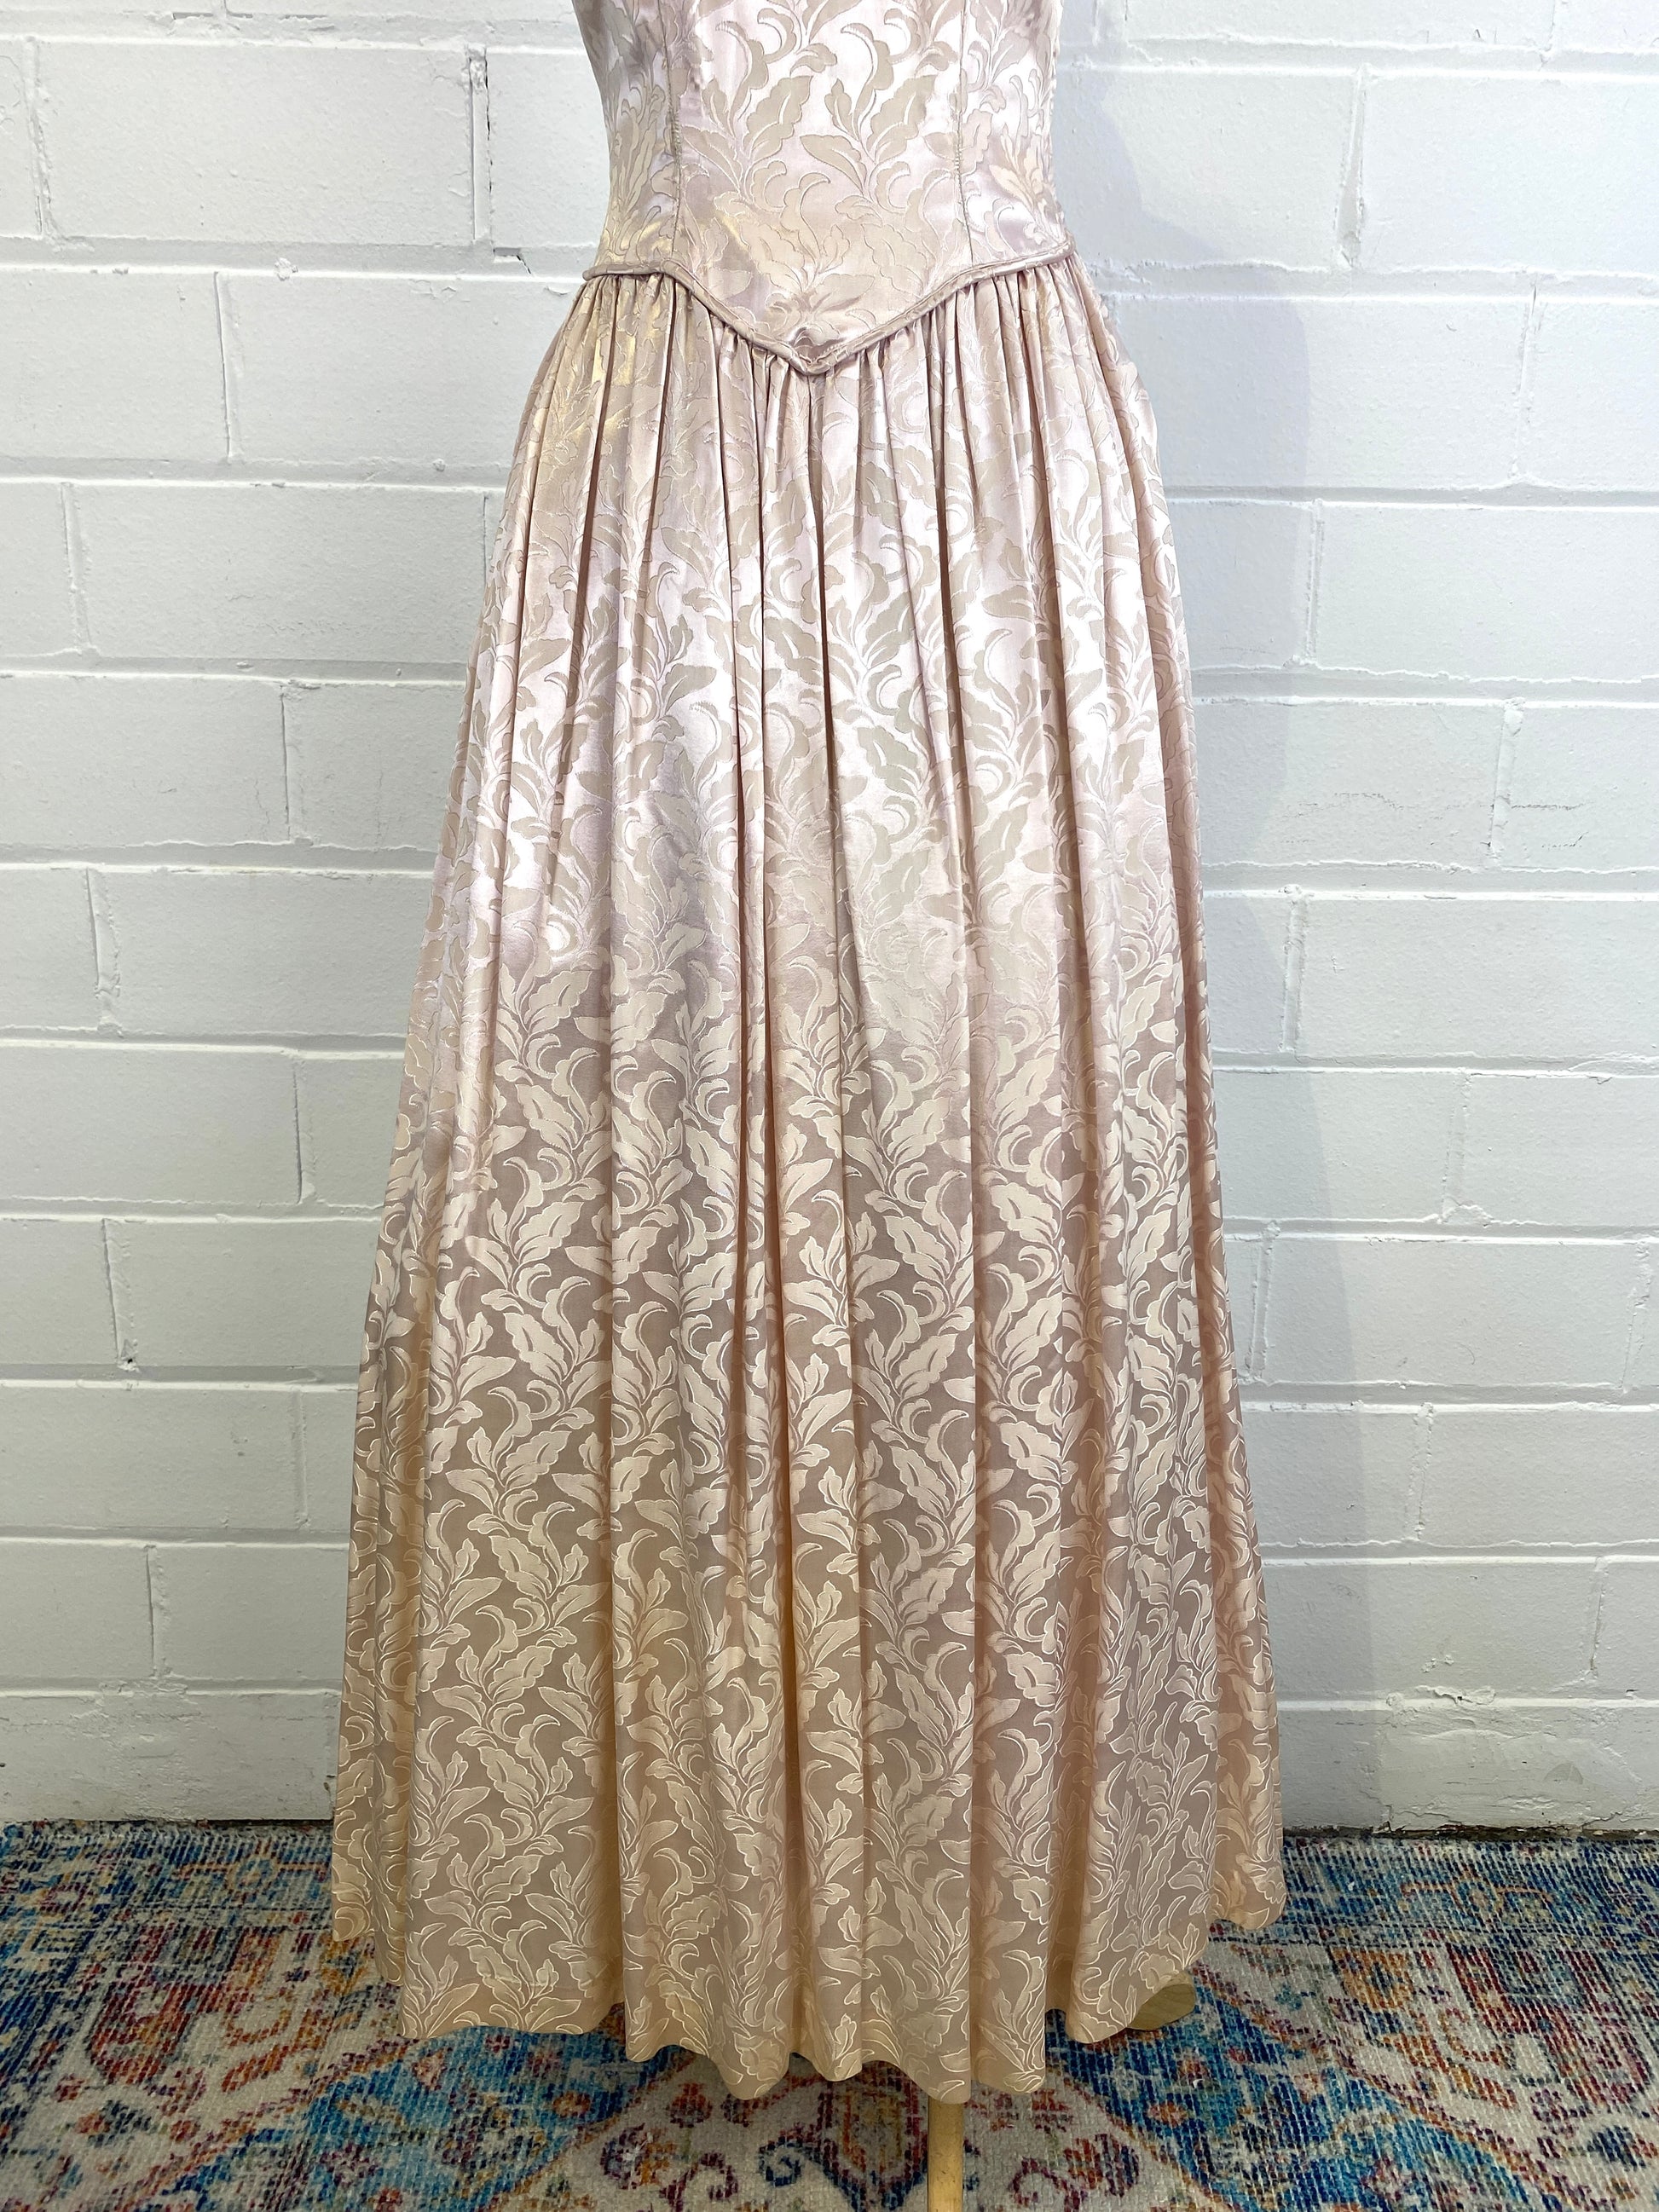 Vintage 1950s Pink Silk Brocade Sweetheart Gown, Small